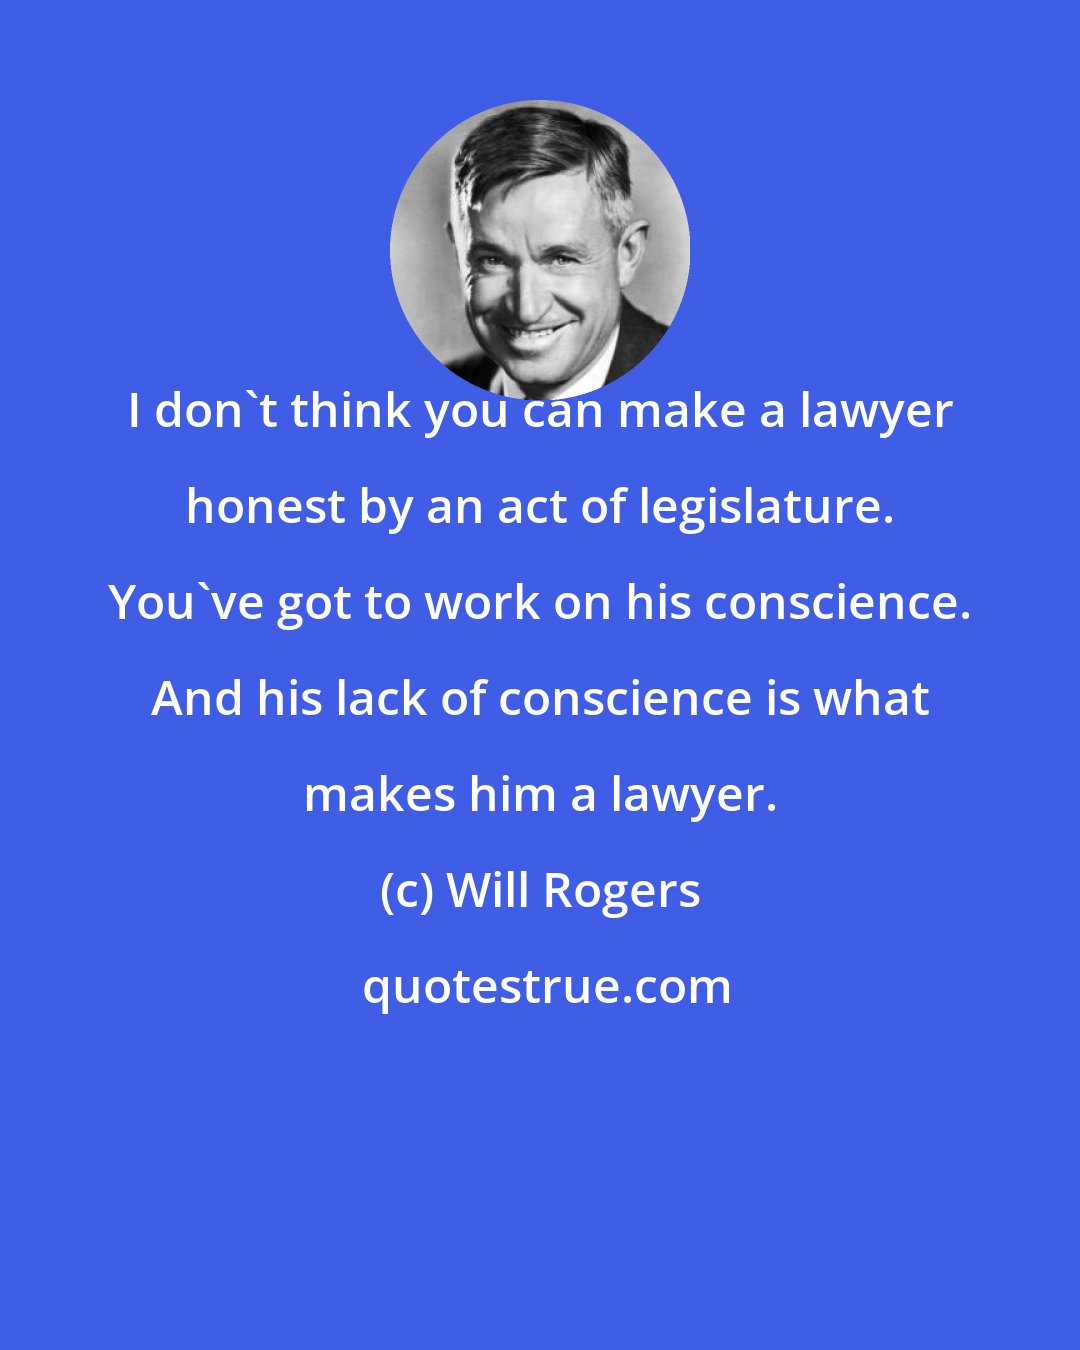 Will Rogers: I don't think you can make a lawyer honest by an act of legislature. You've got to work on his conscience. And his lack of conscience is what makes him a lawyer.